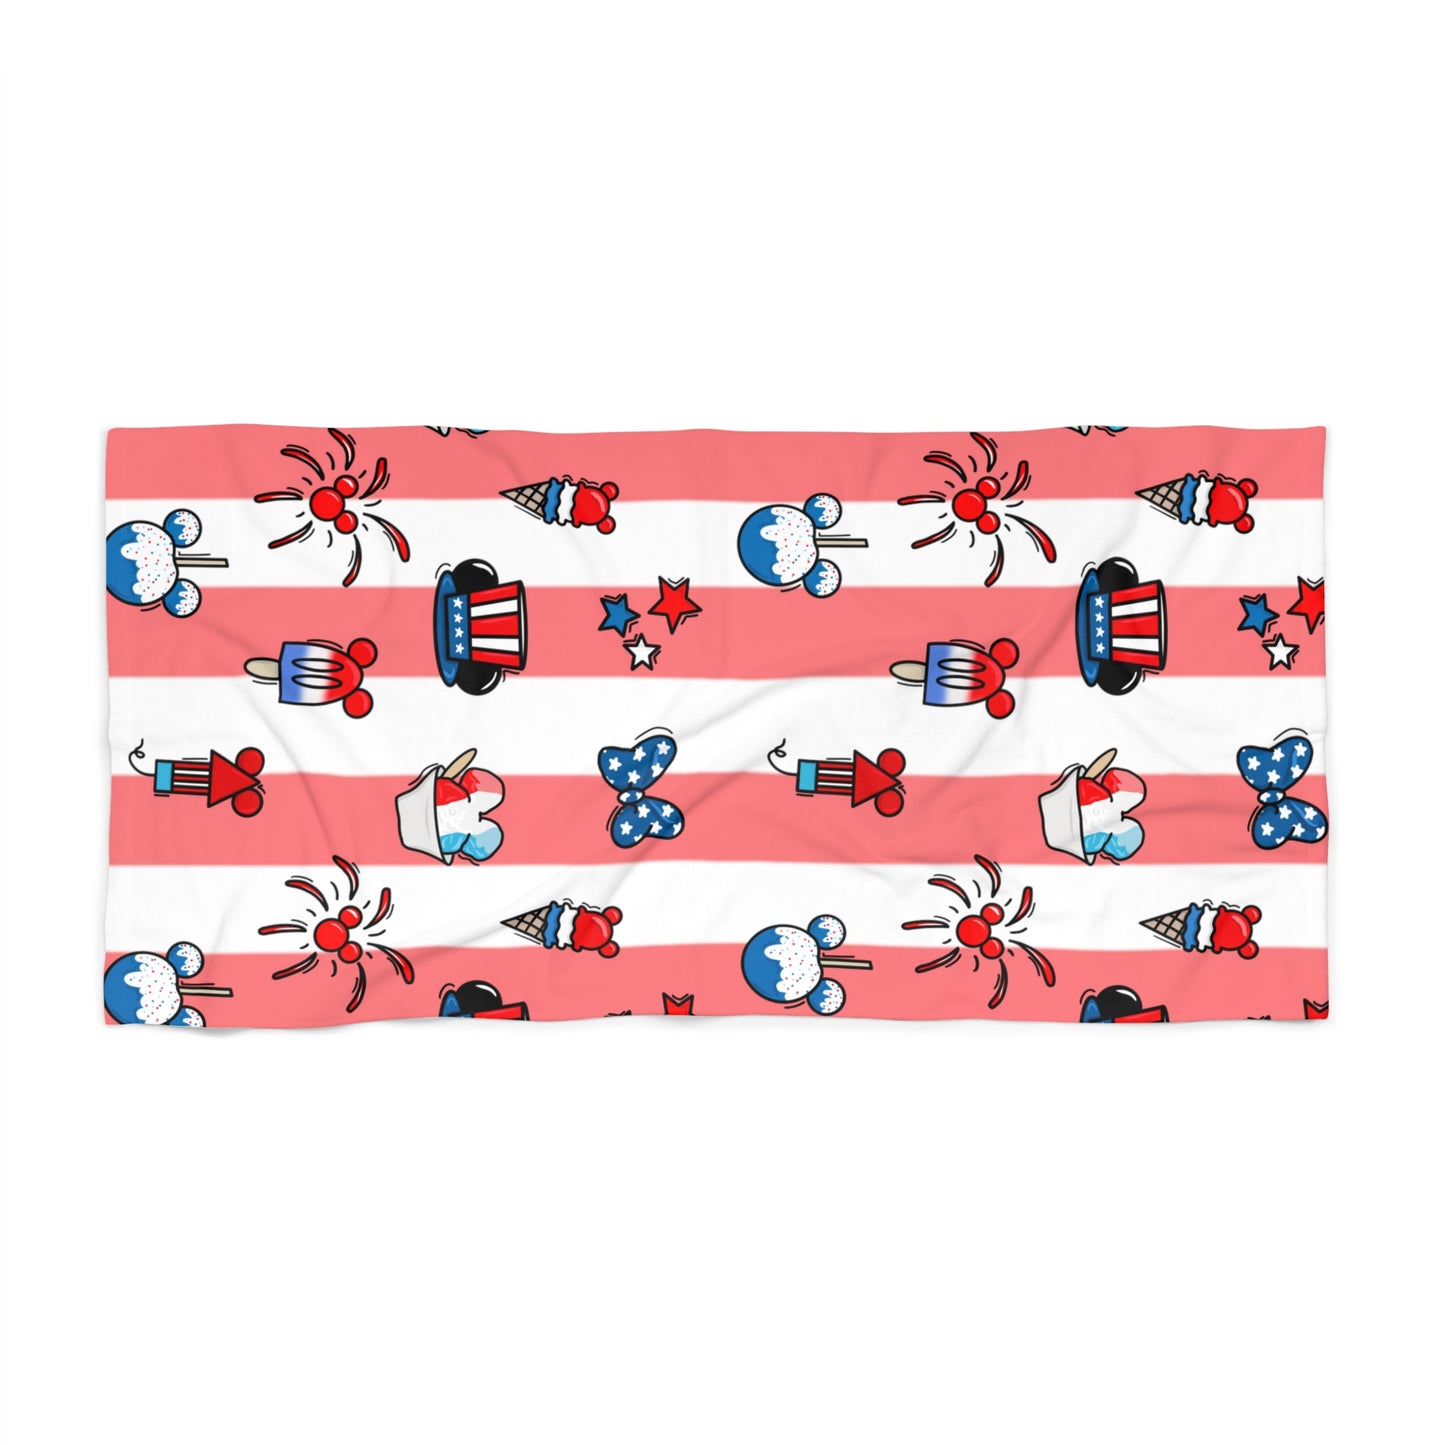 Party in the USA Beach Towel - Red